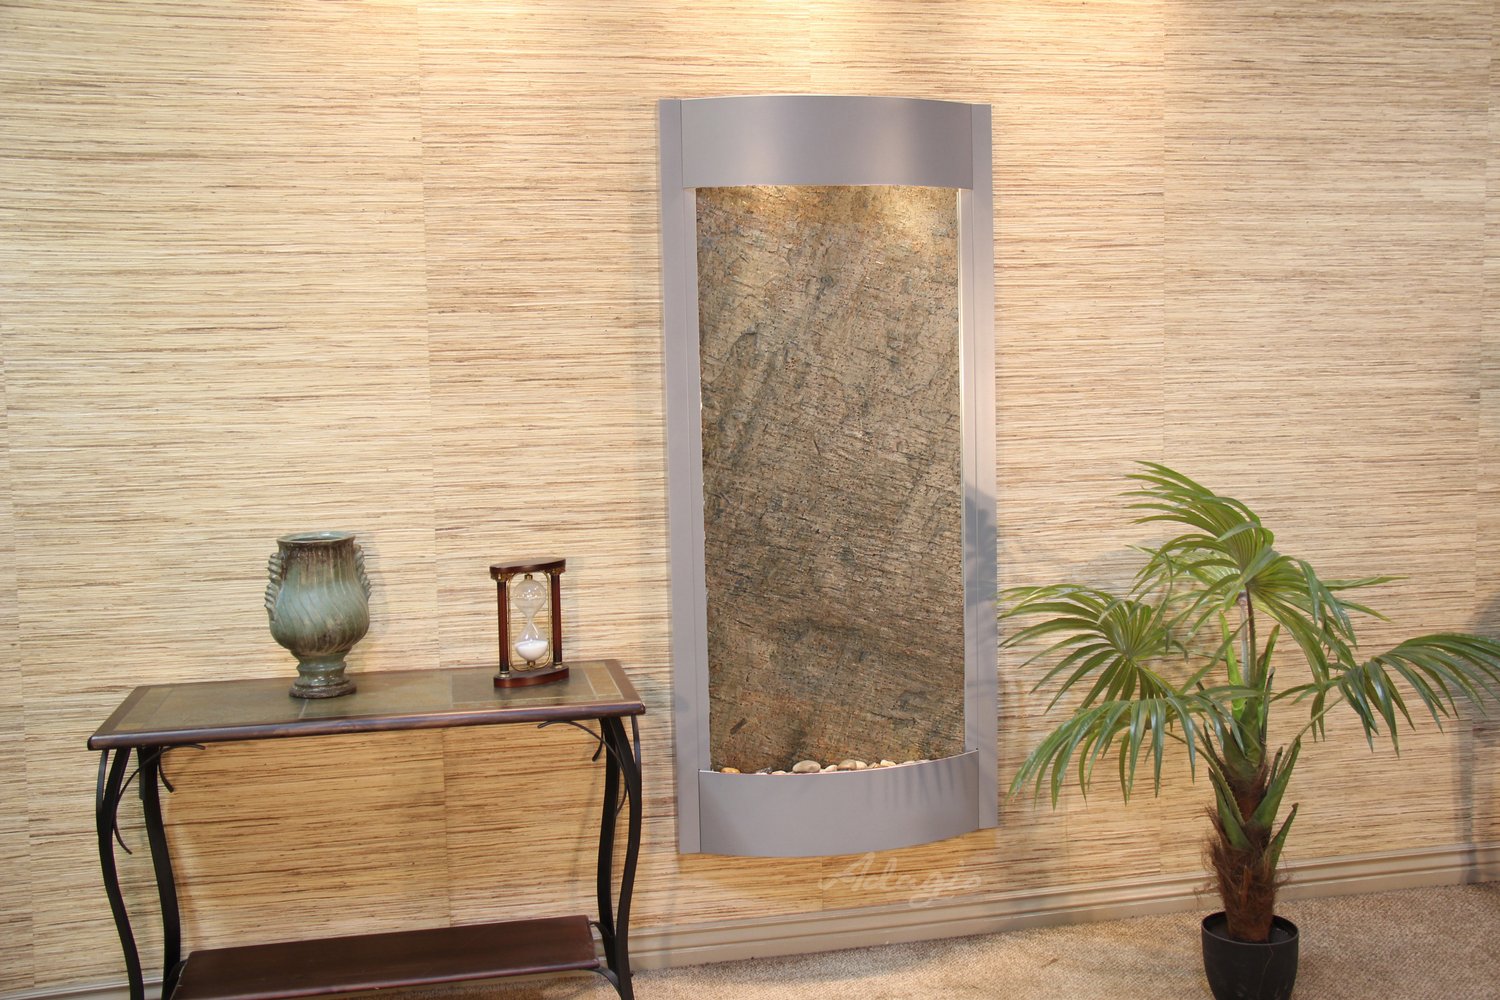 Adagio Pacifica Waters Wall Fountain - FeatherStone.